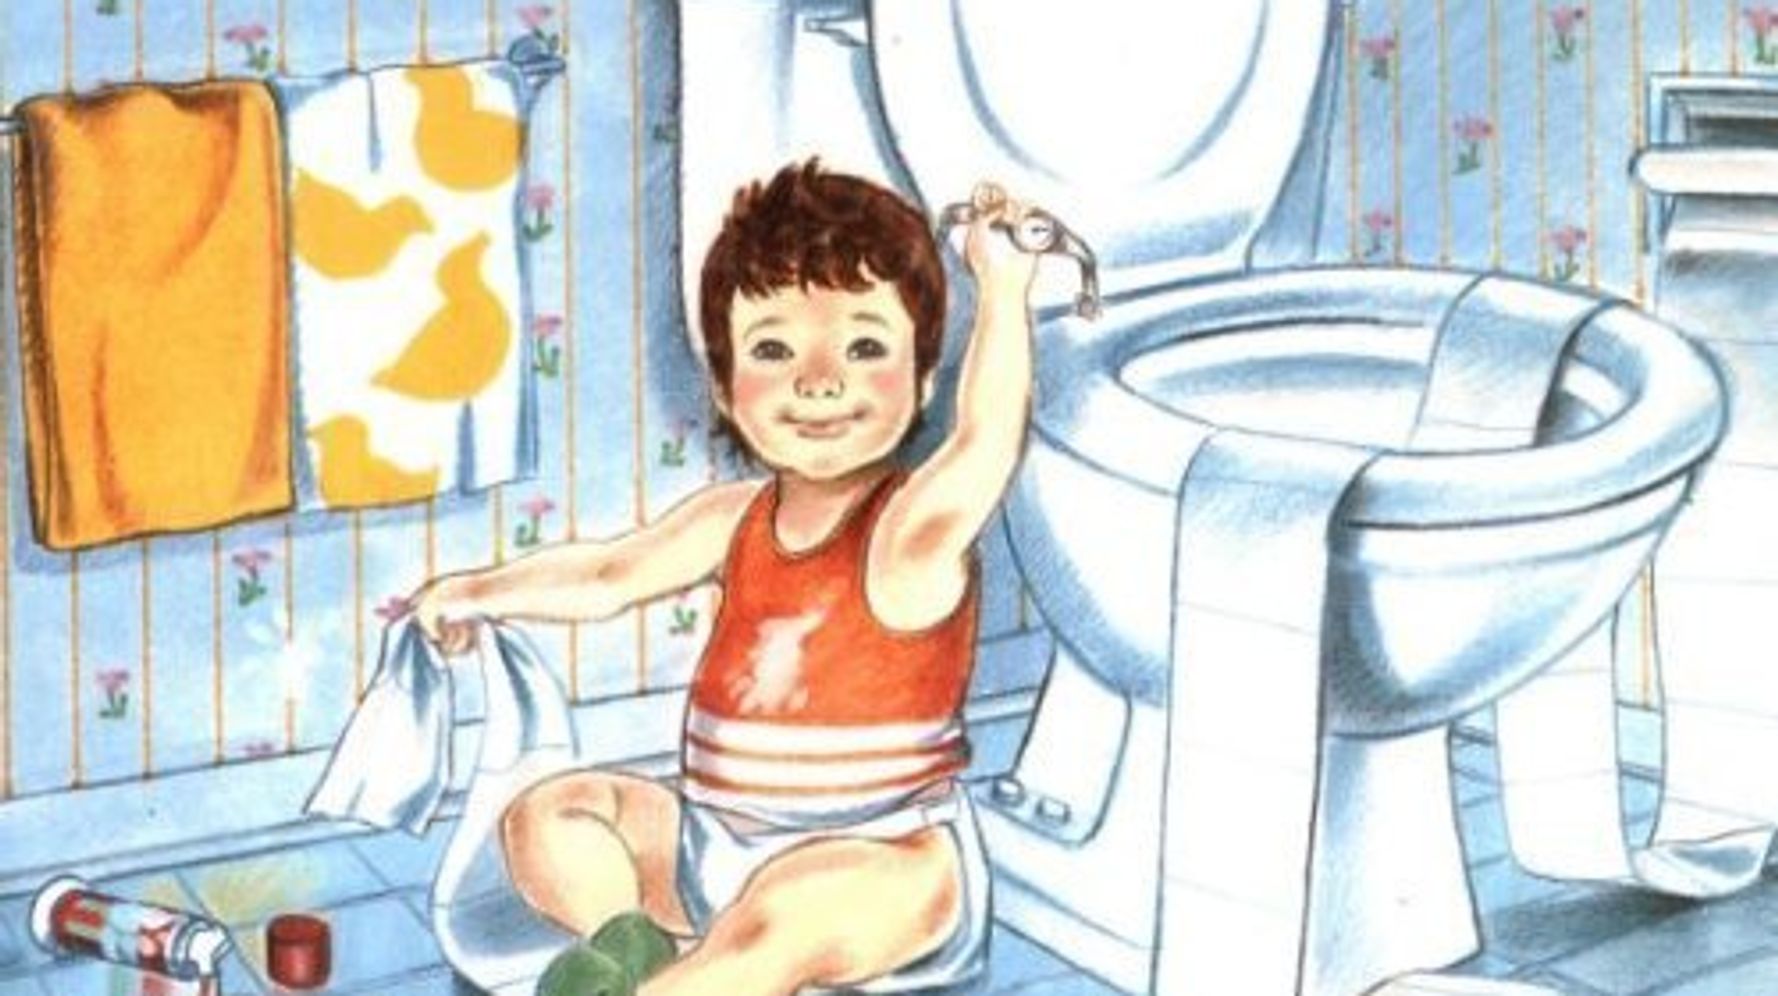 The Heartbreaking Story Behind Iconic Children S Book Love You Forever Huffpost Life